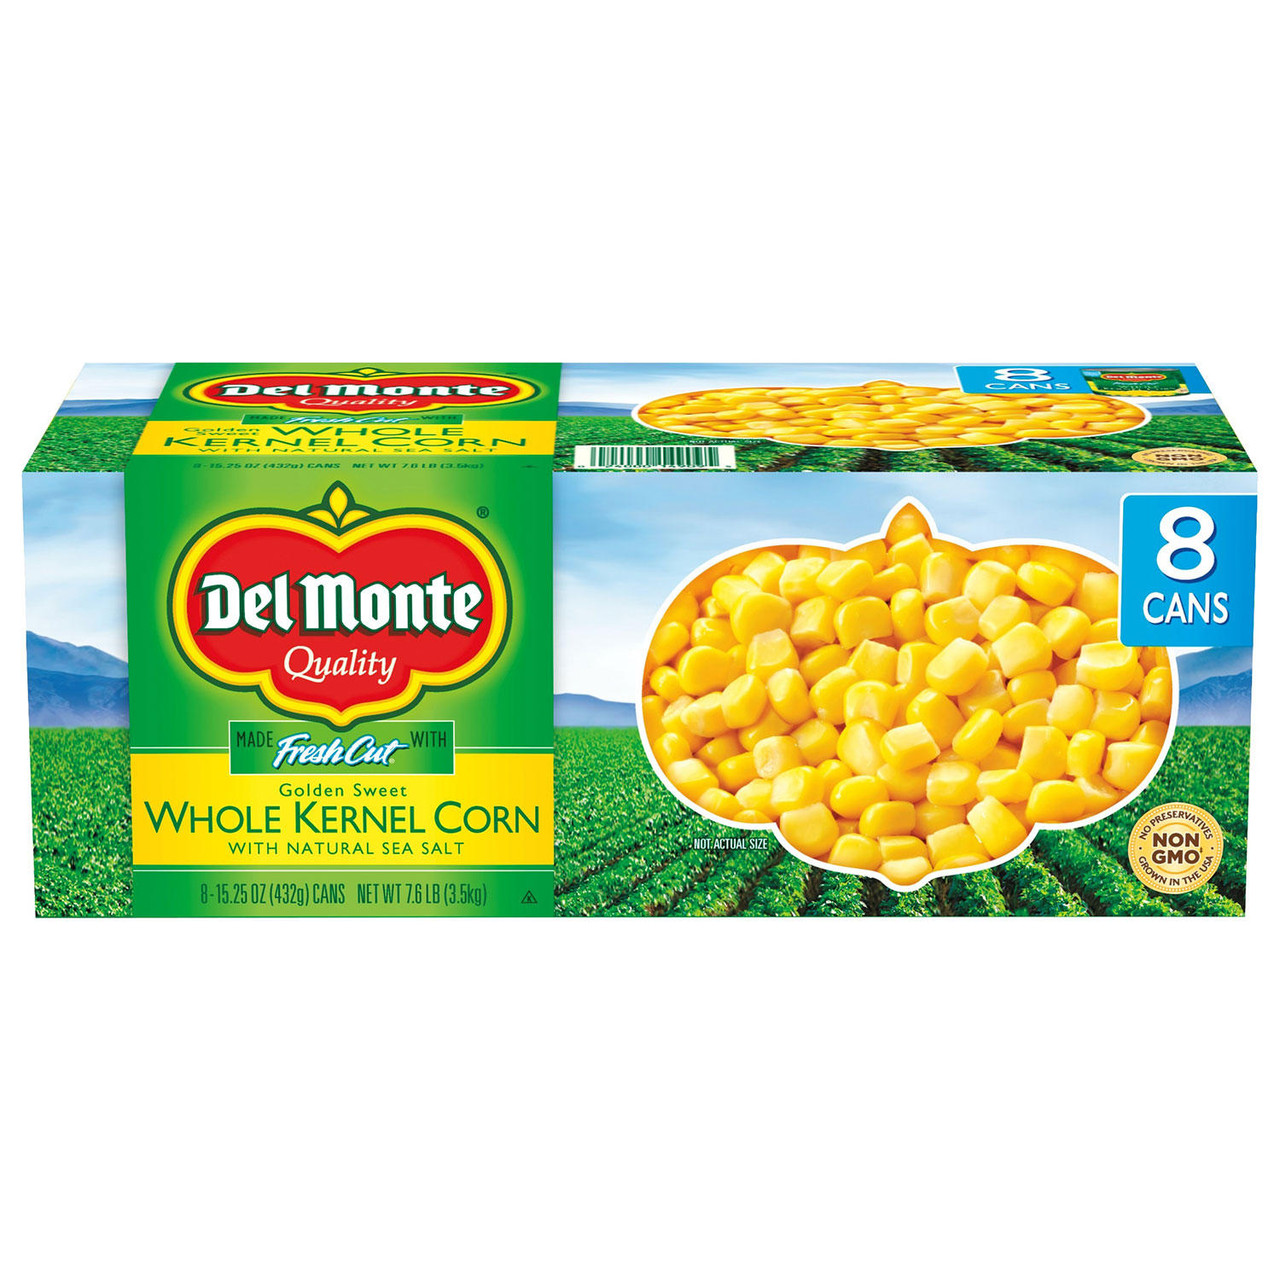 Del Monte Golden Sweet Whole Kernel Corn (15.25 oz., 8 pk.) - [From 39.00 - Choose pk Qty ] - *Ships from Miami